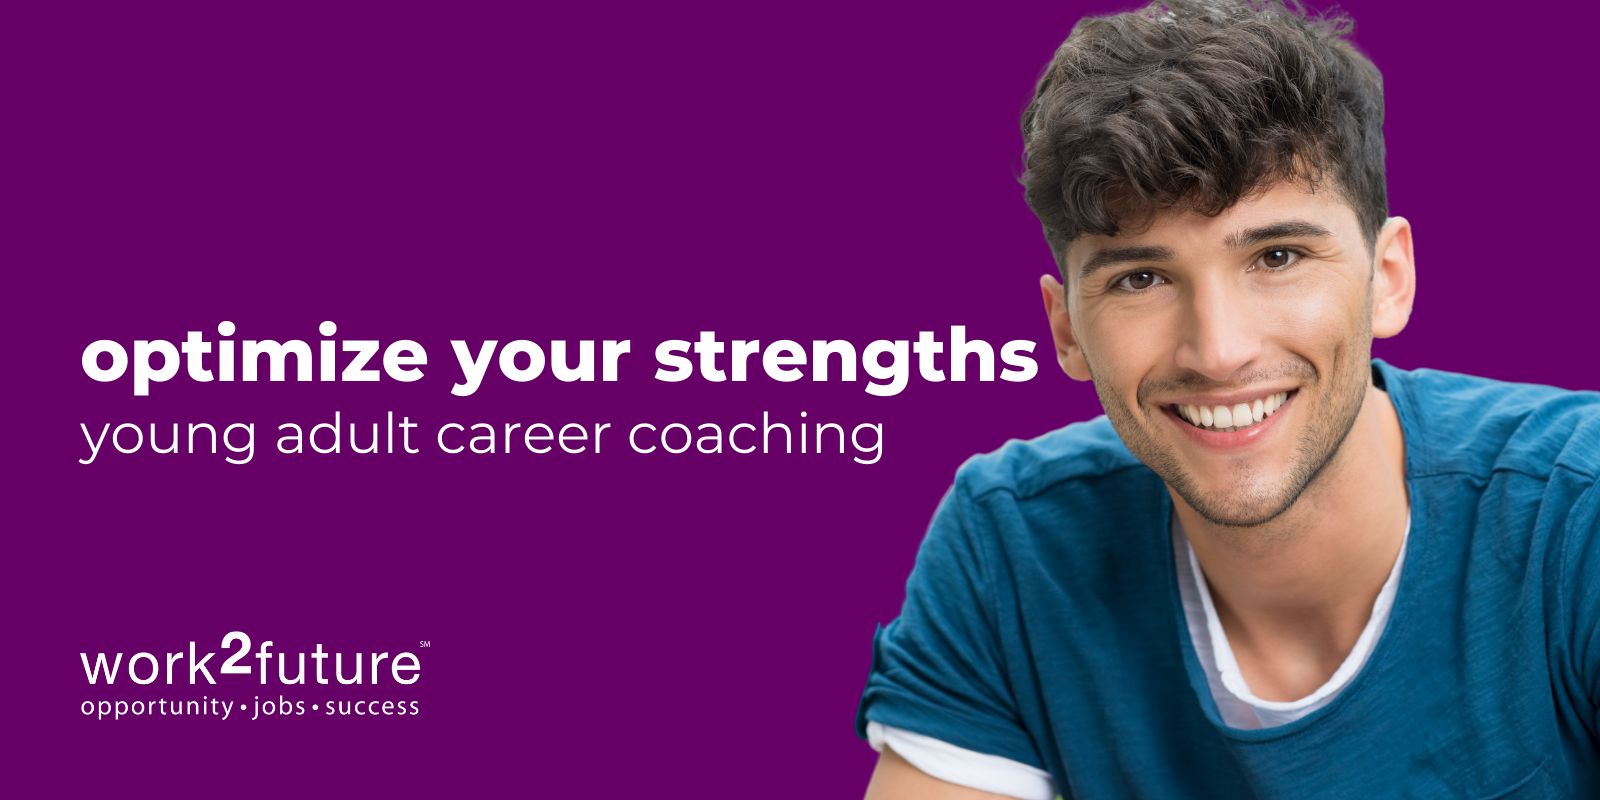 optimize your strengths. young adult career coaching.